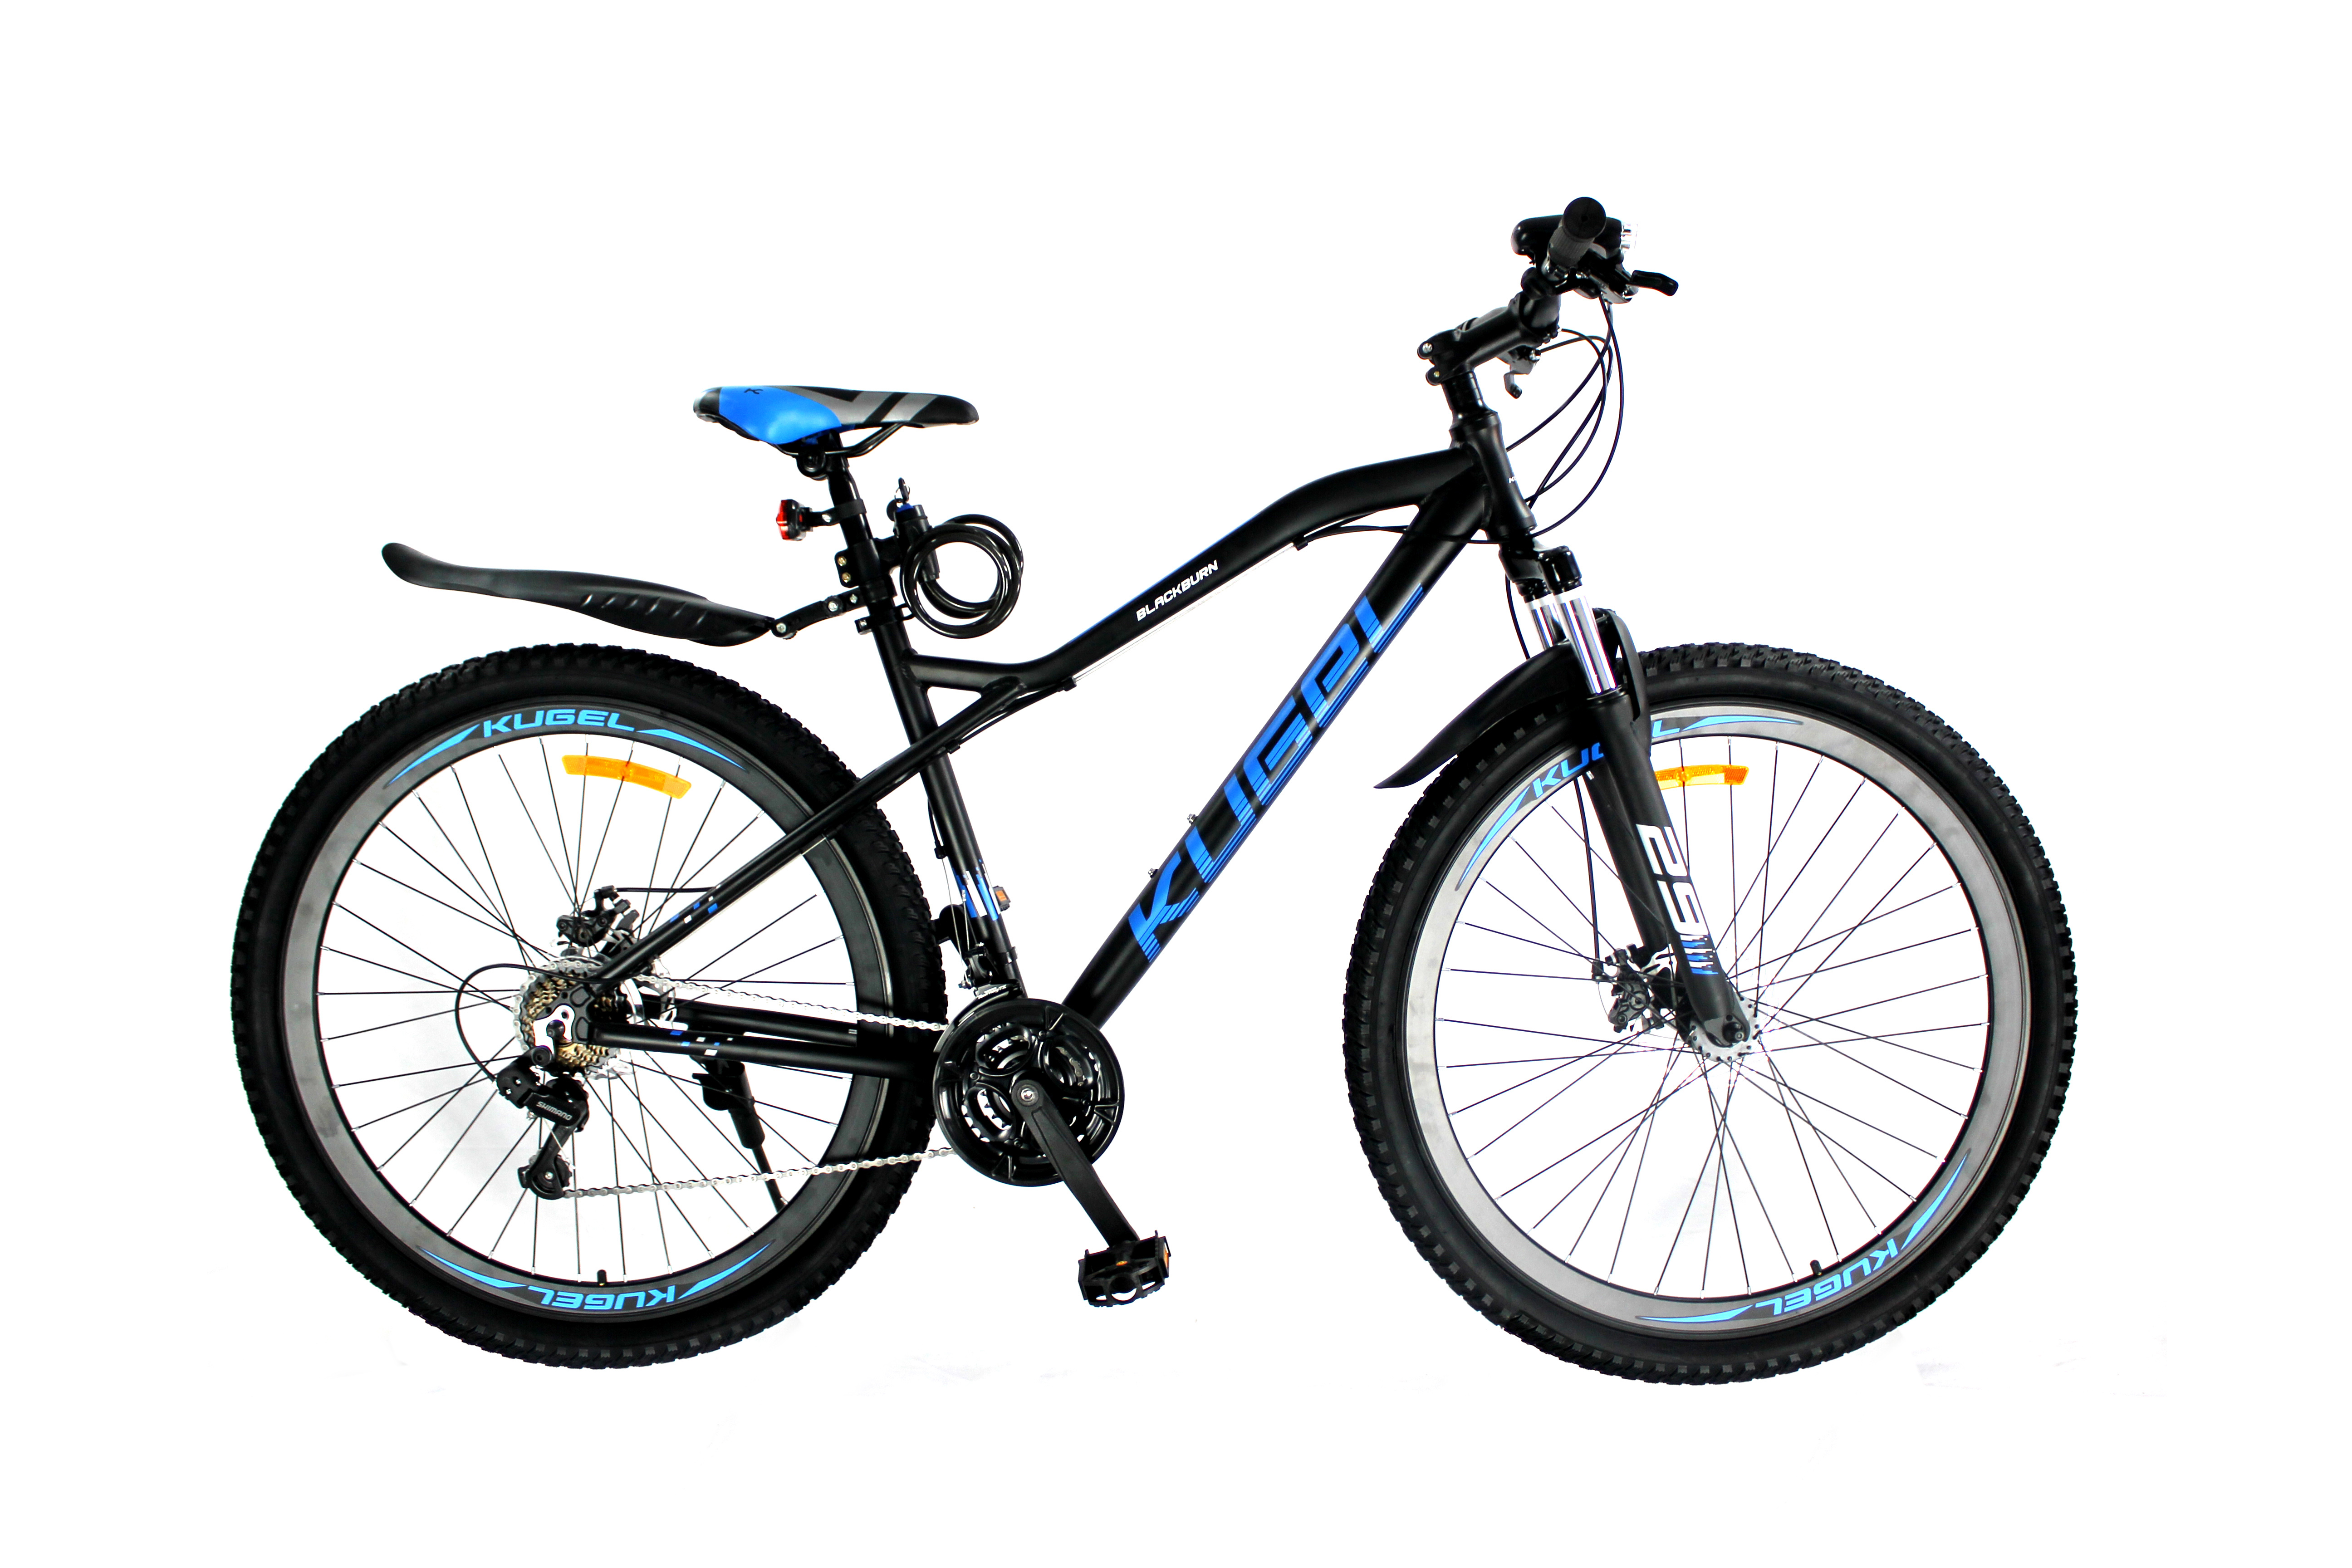 Details about   26" Front Suspension Mountain Bike 21 Speed City Bike Men's Bicycle MTB Blue 